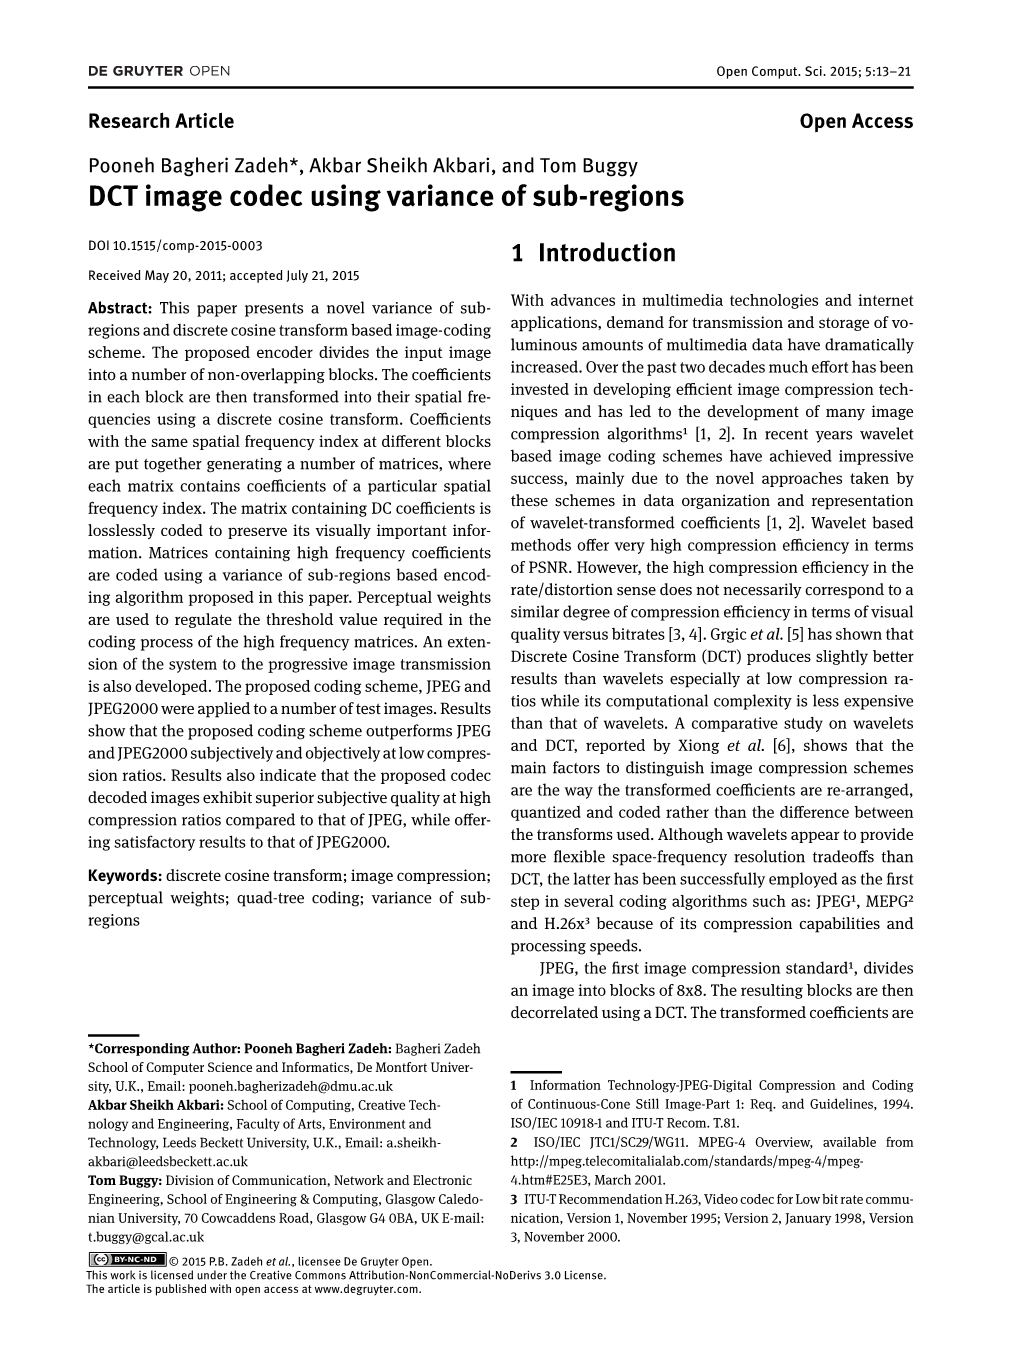 DCT Image Codec Using Variance of Sub-Regions